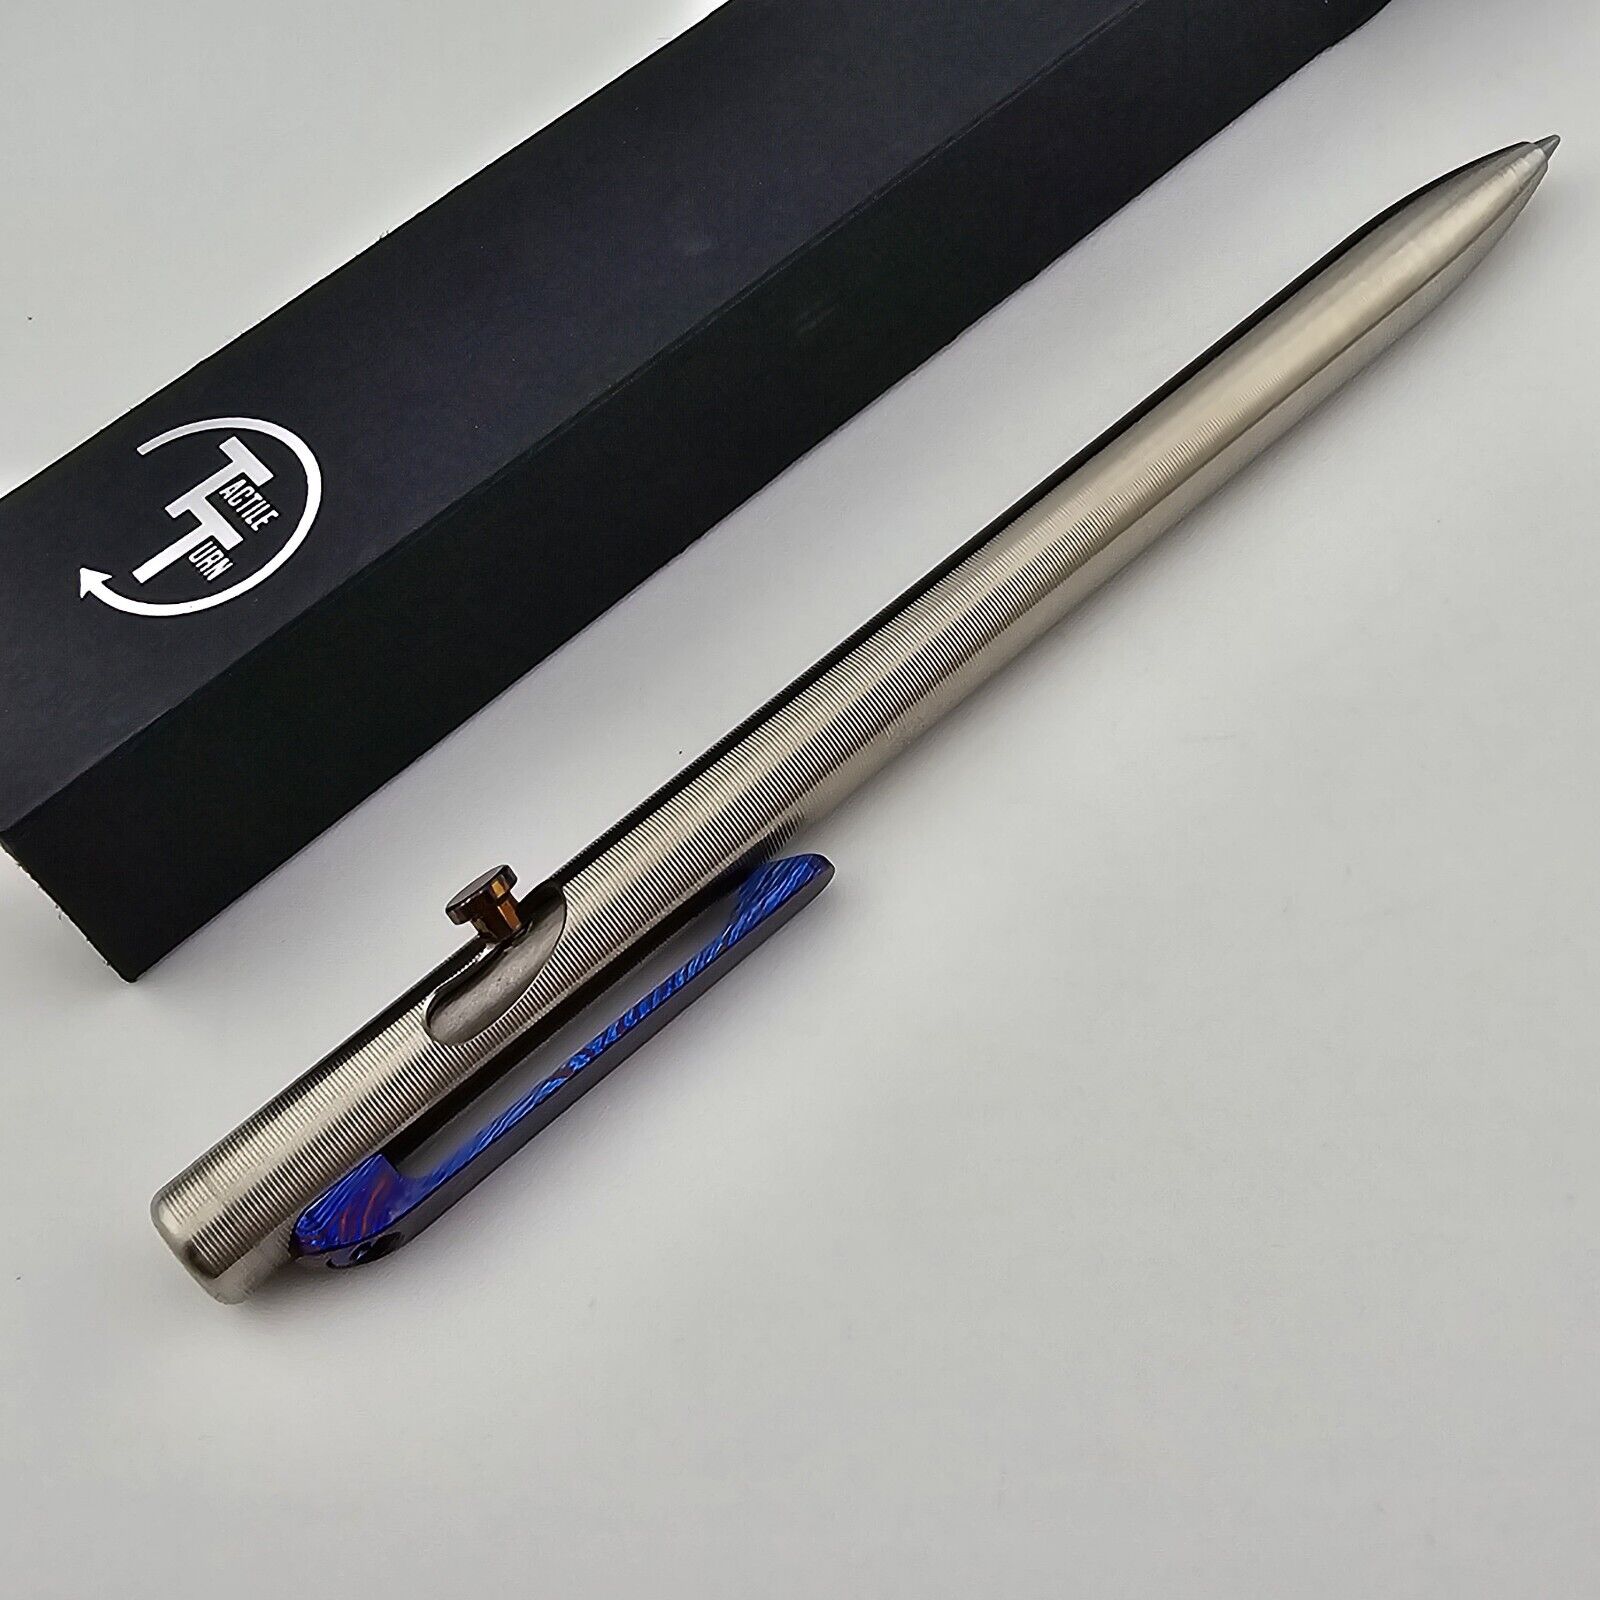 Tactile Turn Slim Bolt Action Pen Titanium Body Timascus Clip and Bolt USA MADE